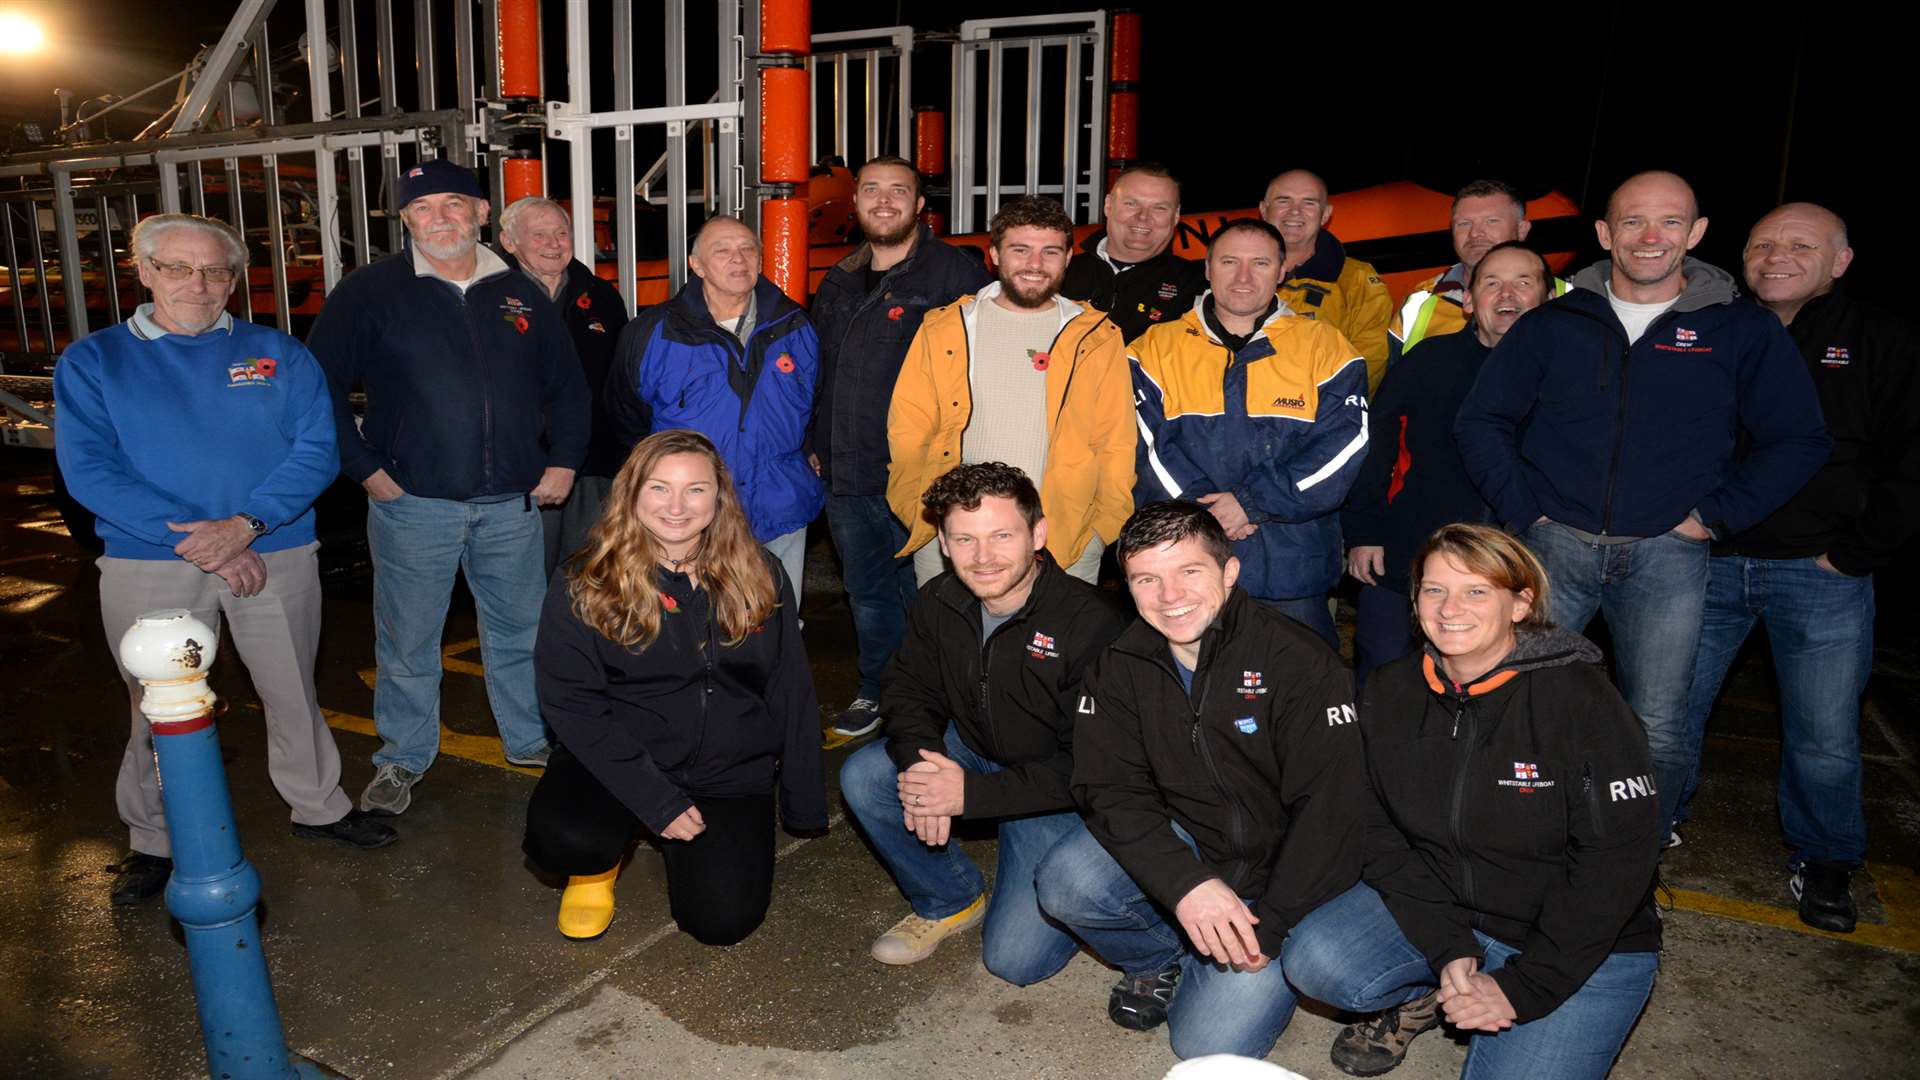 Alex visited more than 200 lifeboat stations